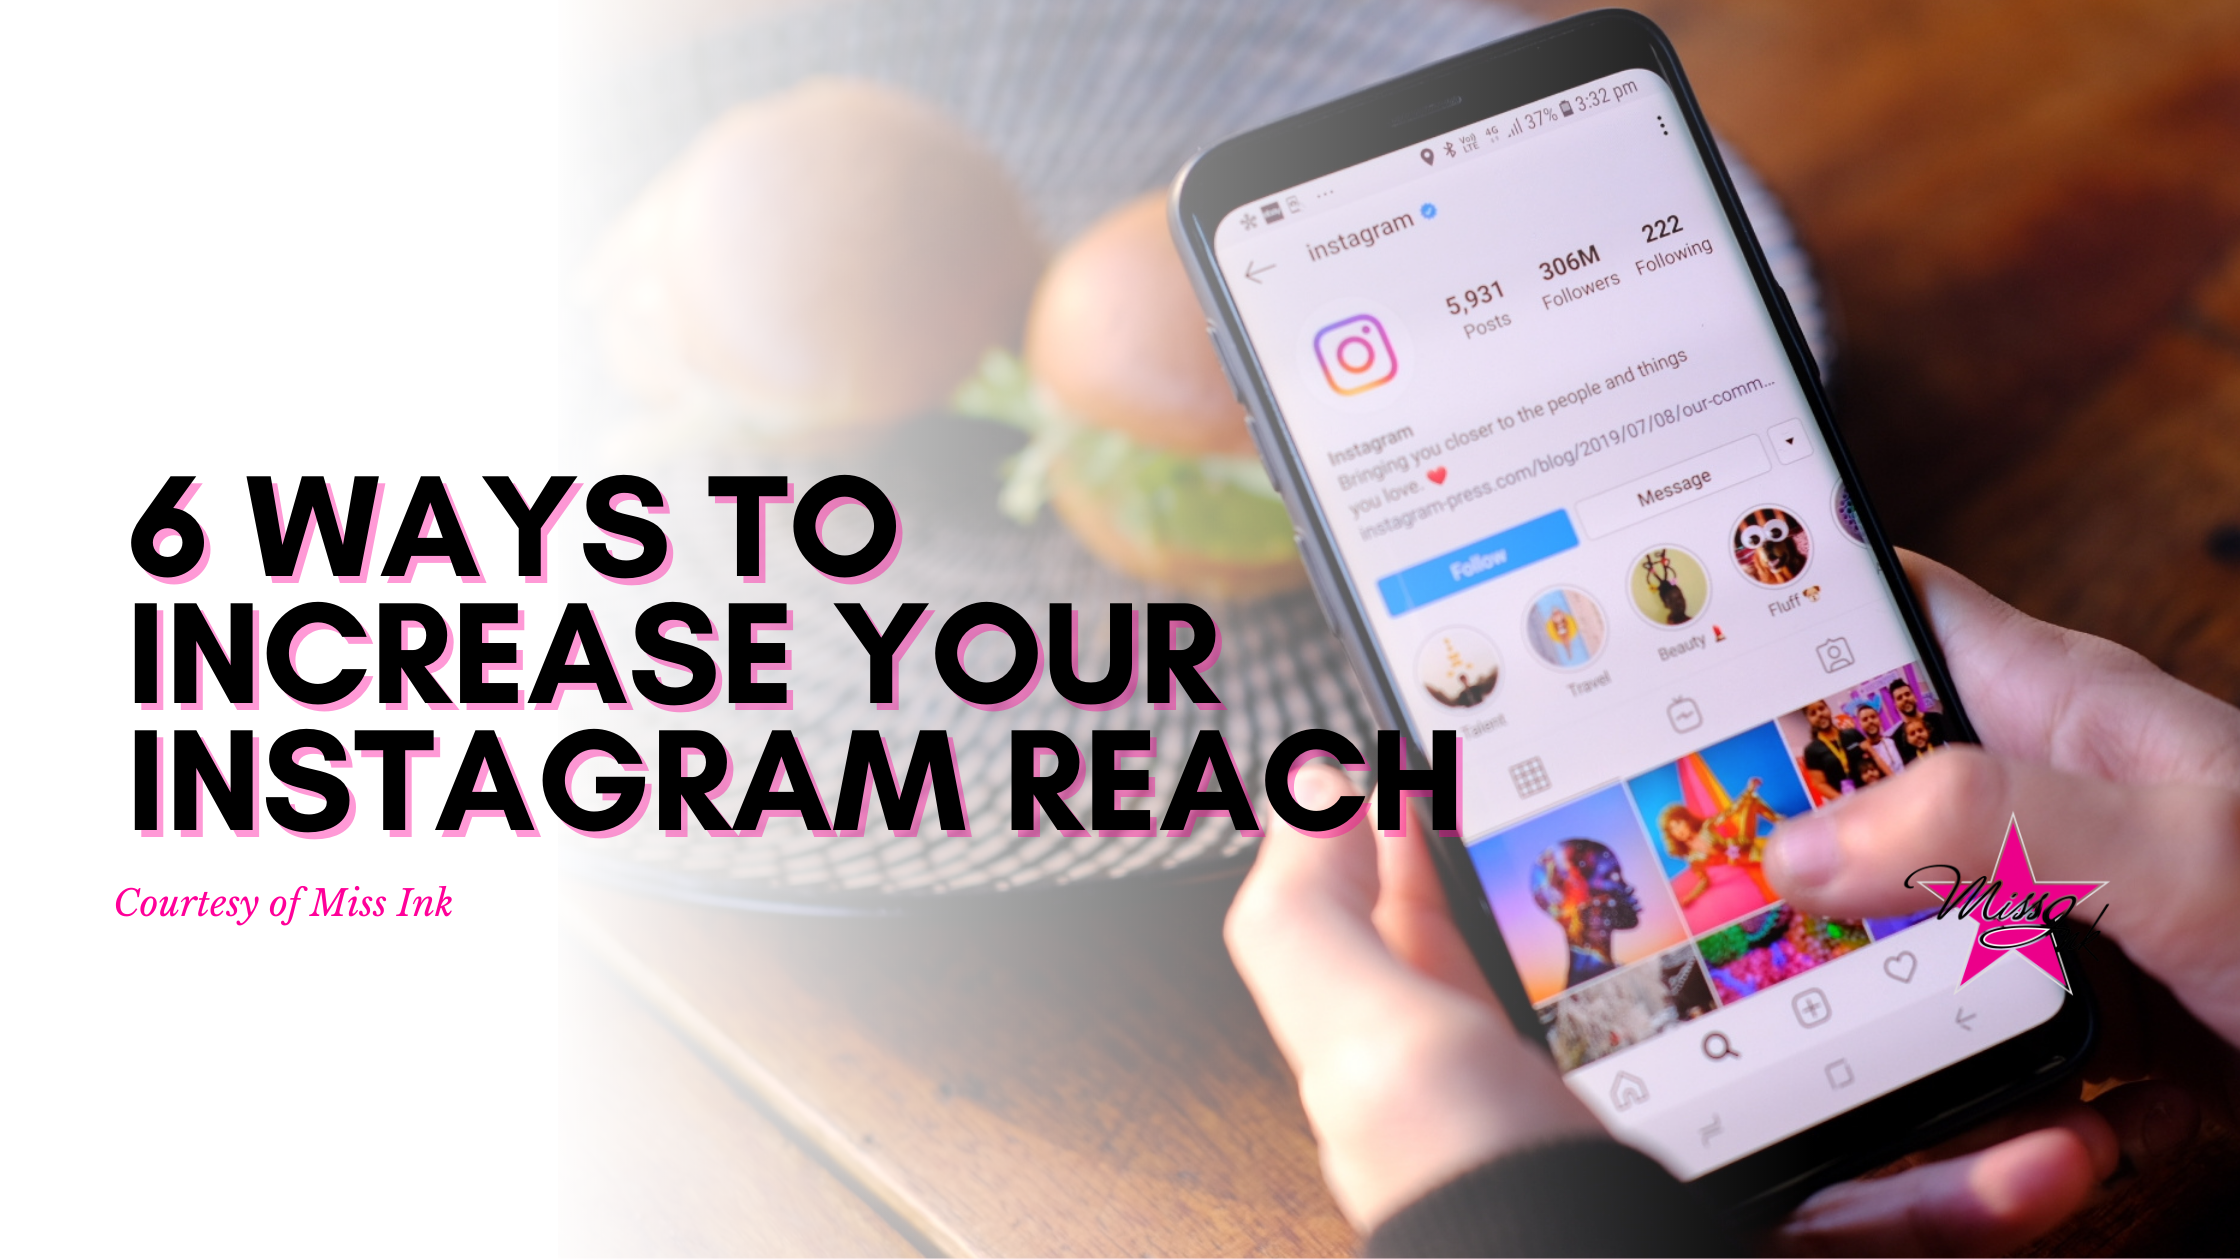 6 Ways To Increase Your Instagram Reach